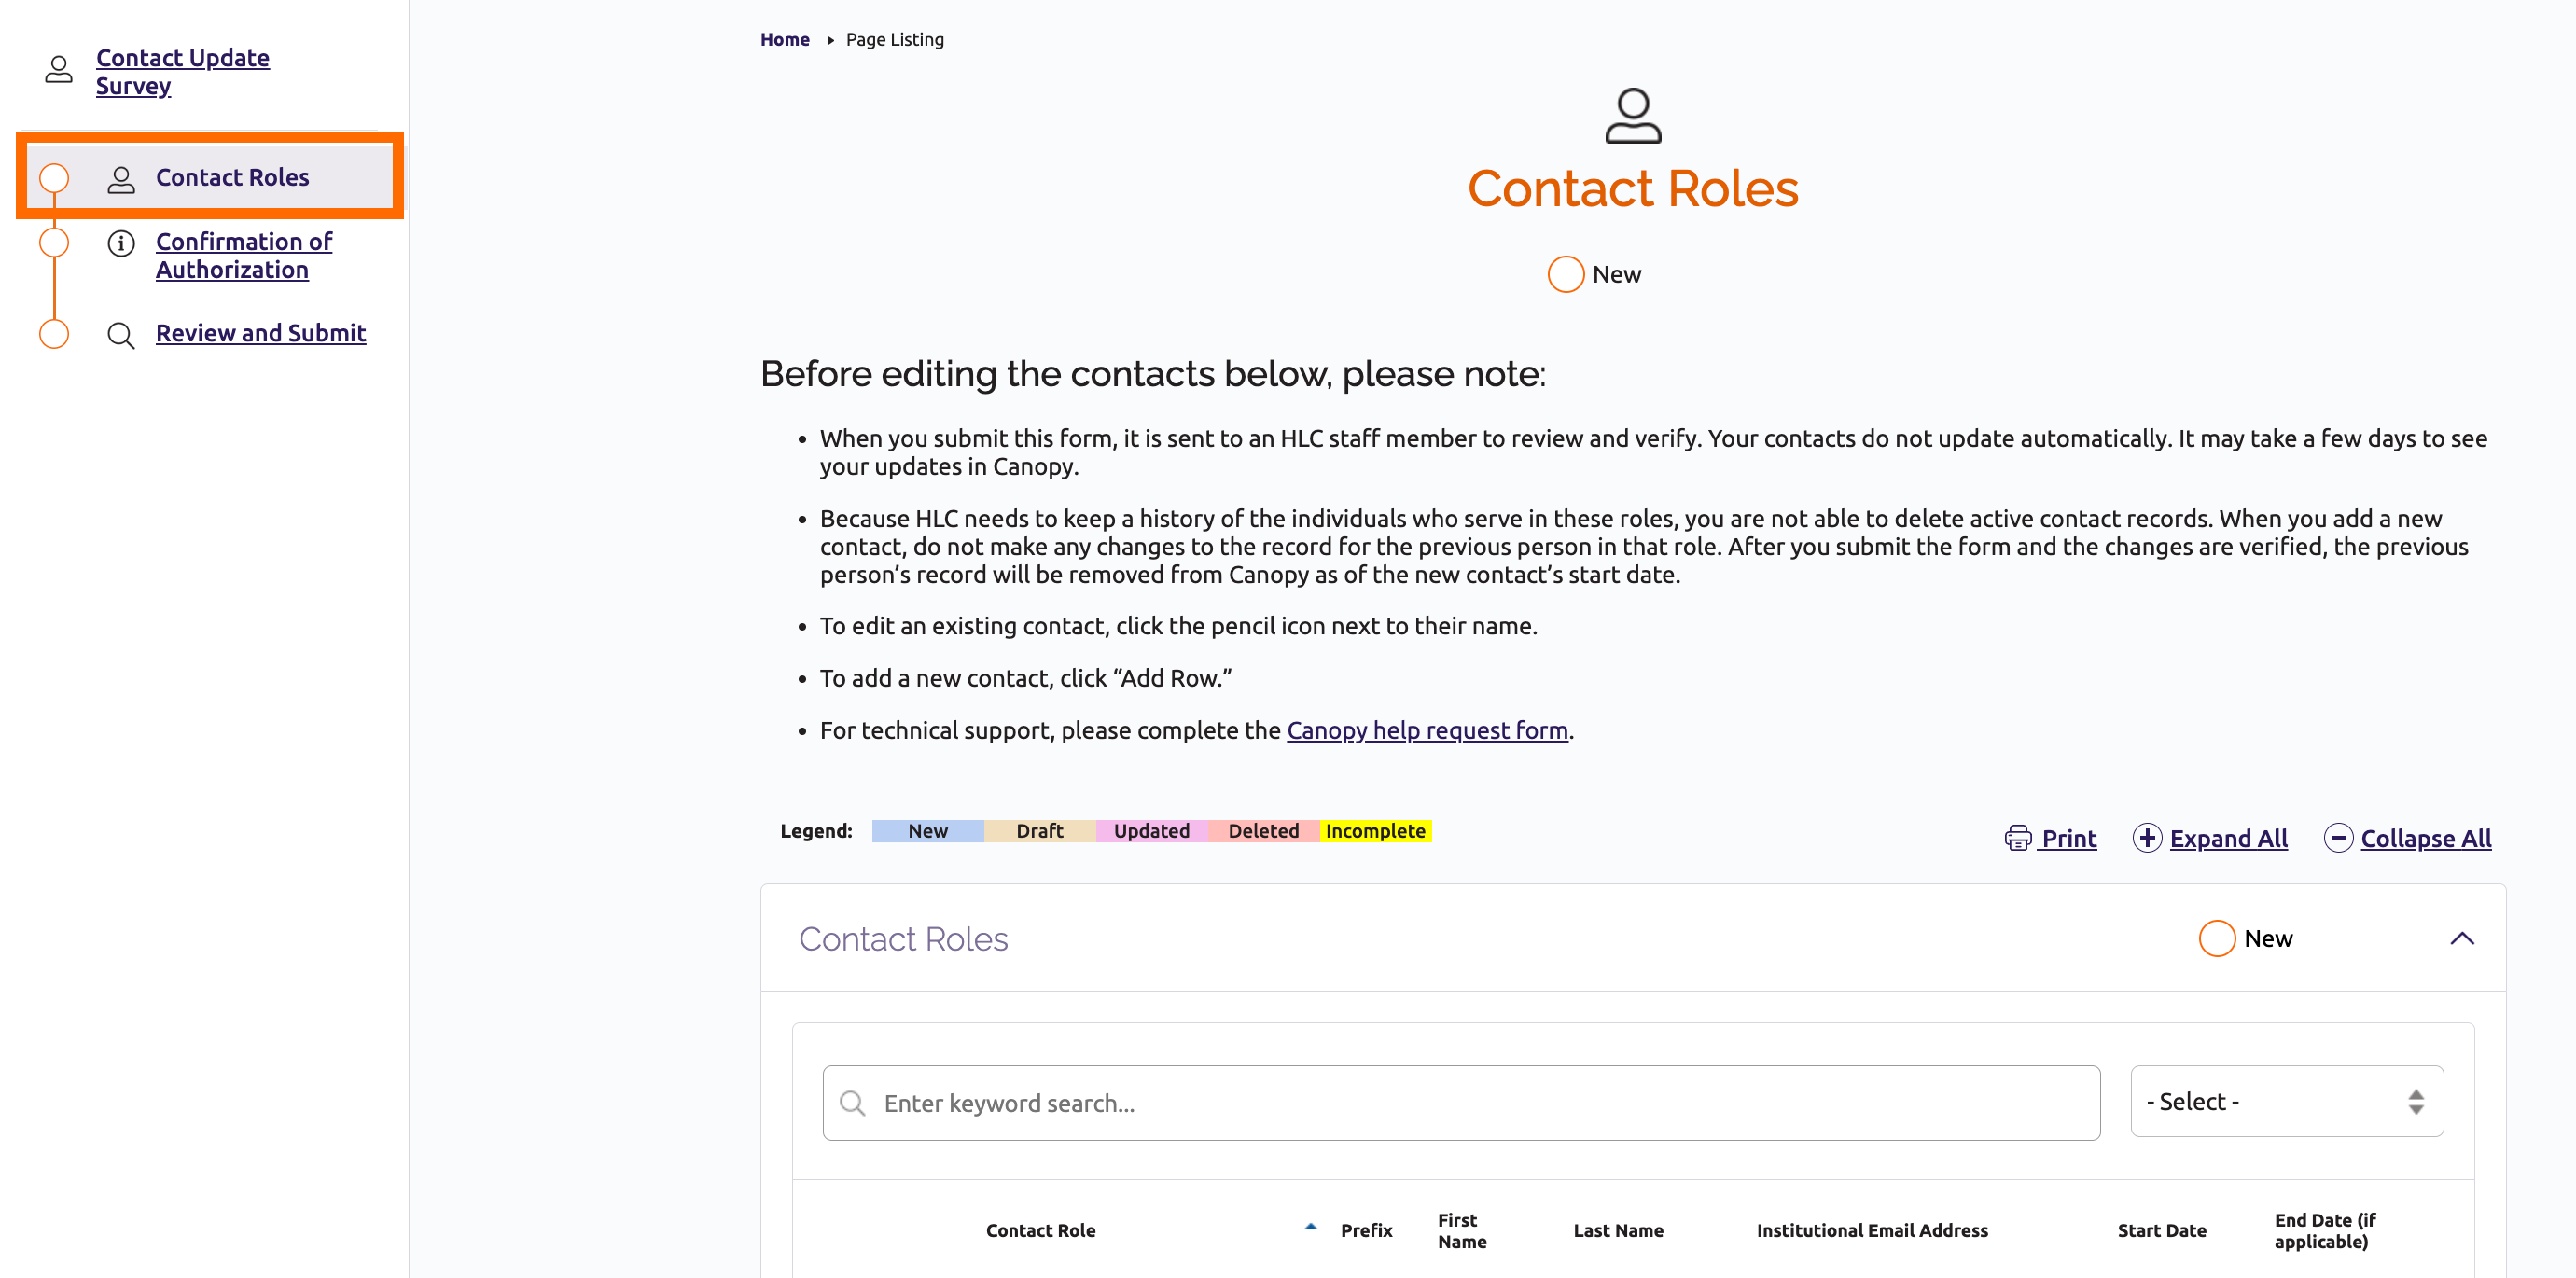 Contact Roles section page